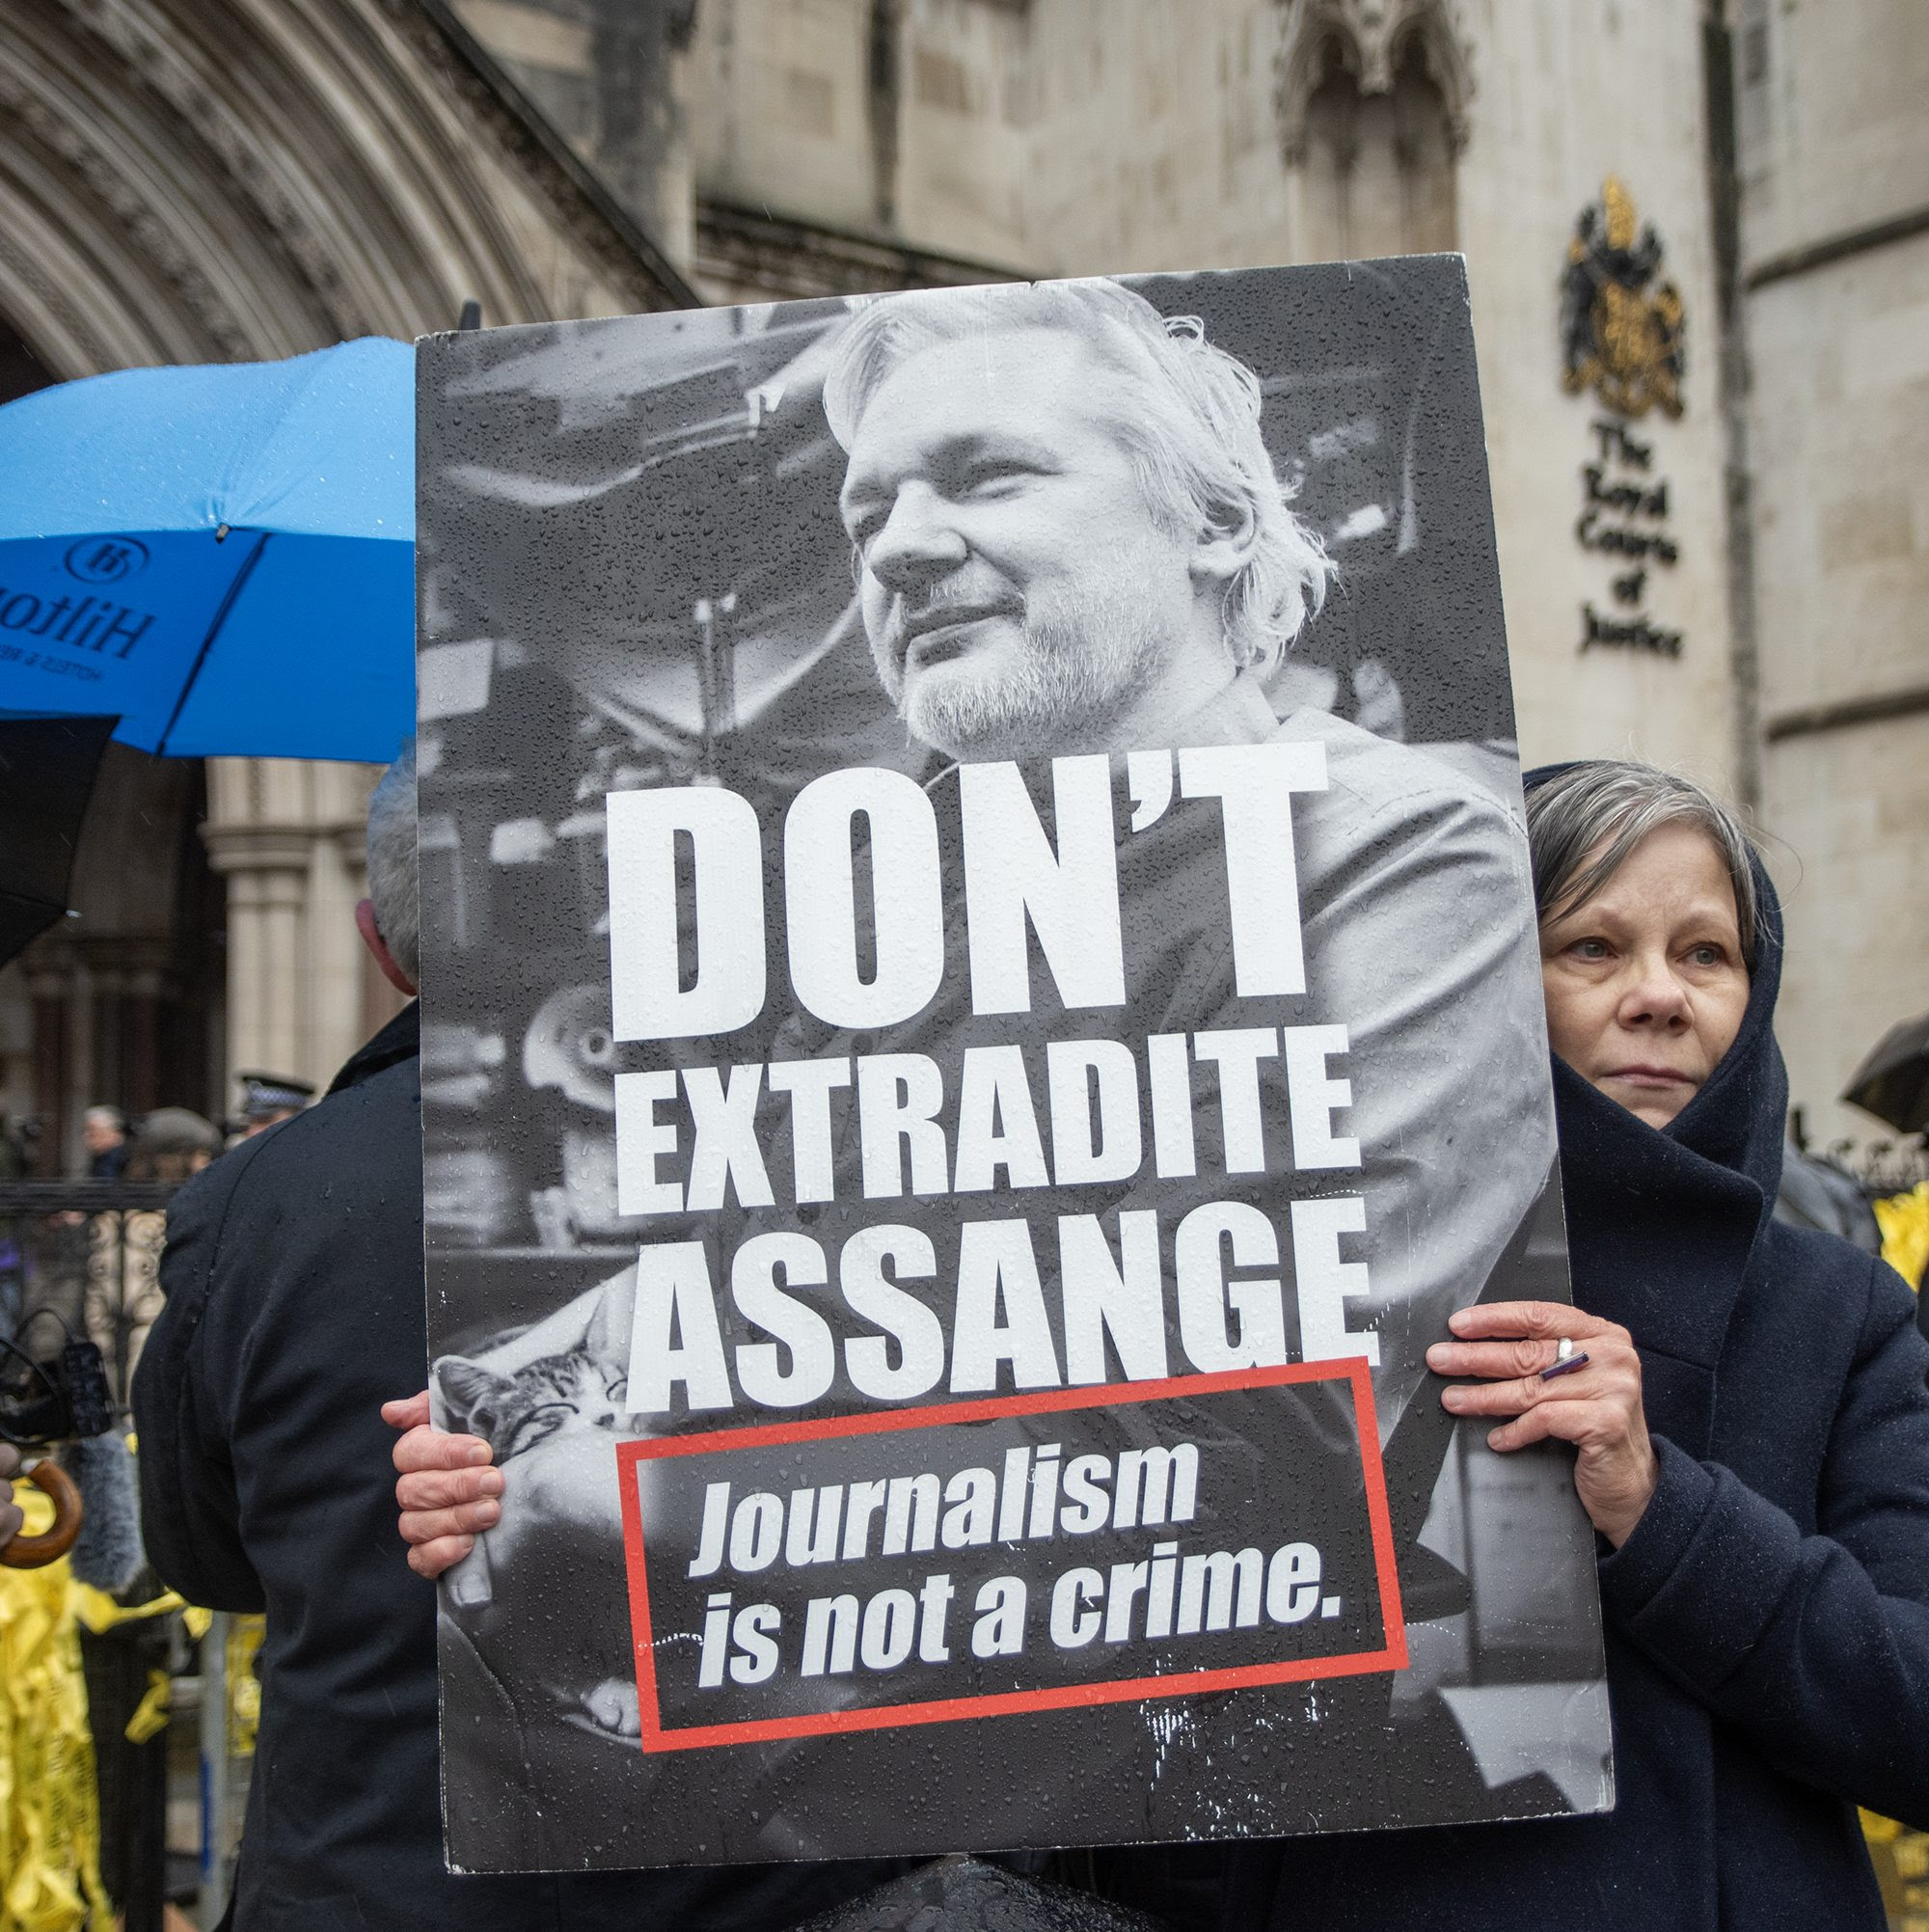 A protester holds a placard outside the Royal Court of Justice during the demonstration. Hundreds of protesters gathered on the second day of Julian Assange's trial in front of the Royal Court of Justice in London, UK. Photo by Krisztian Elek/SOPA Images/LightRocket via Getty Images